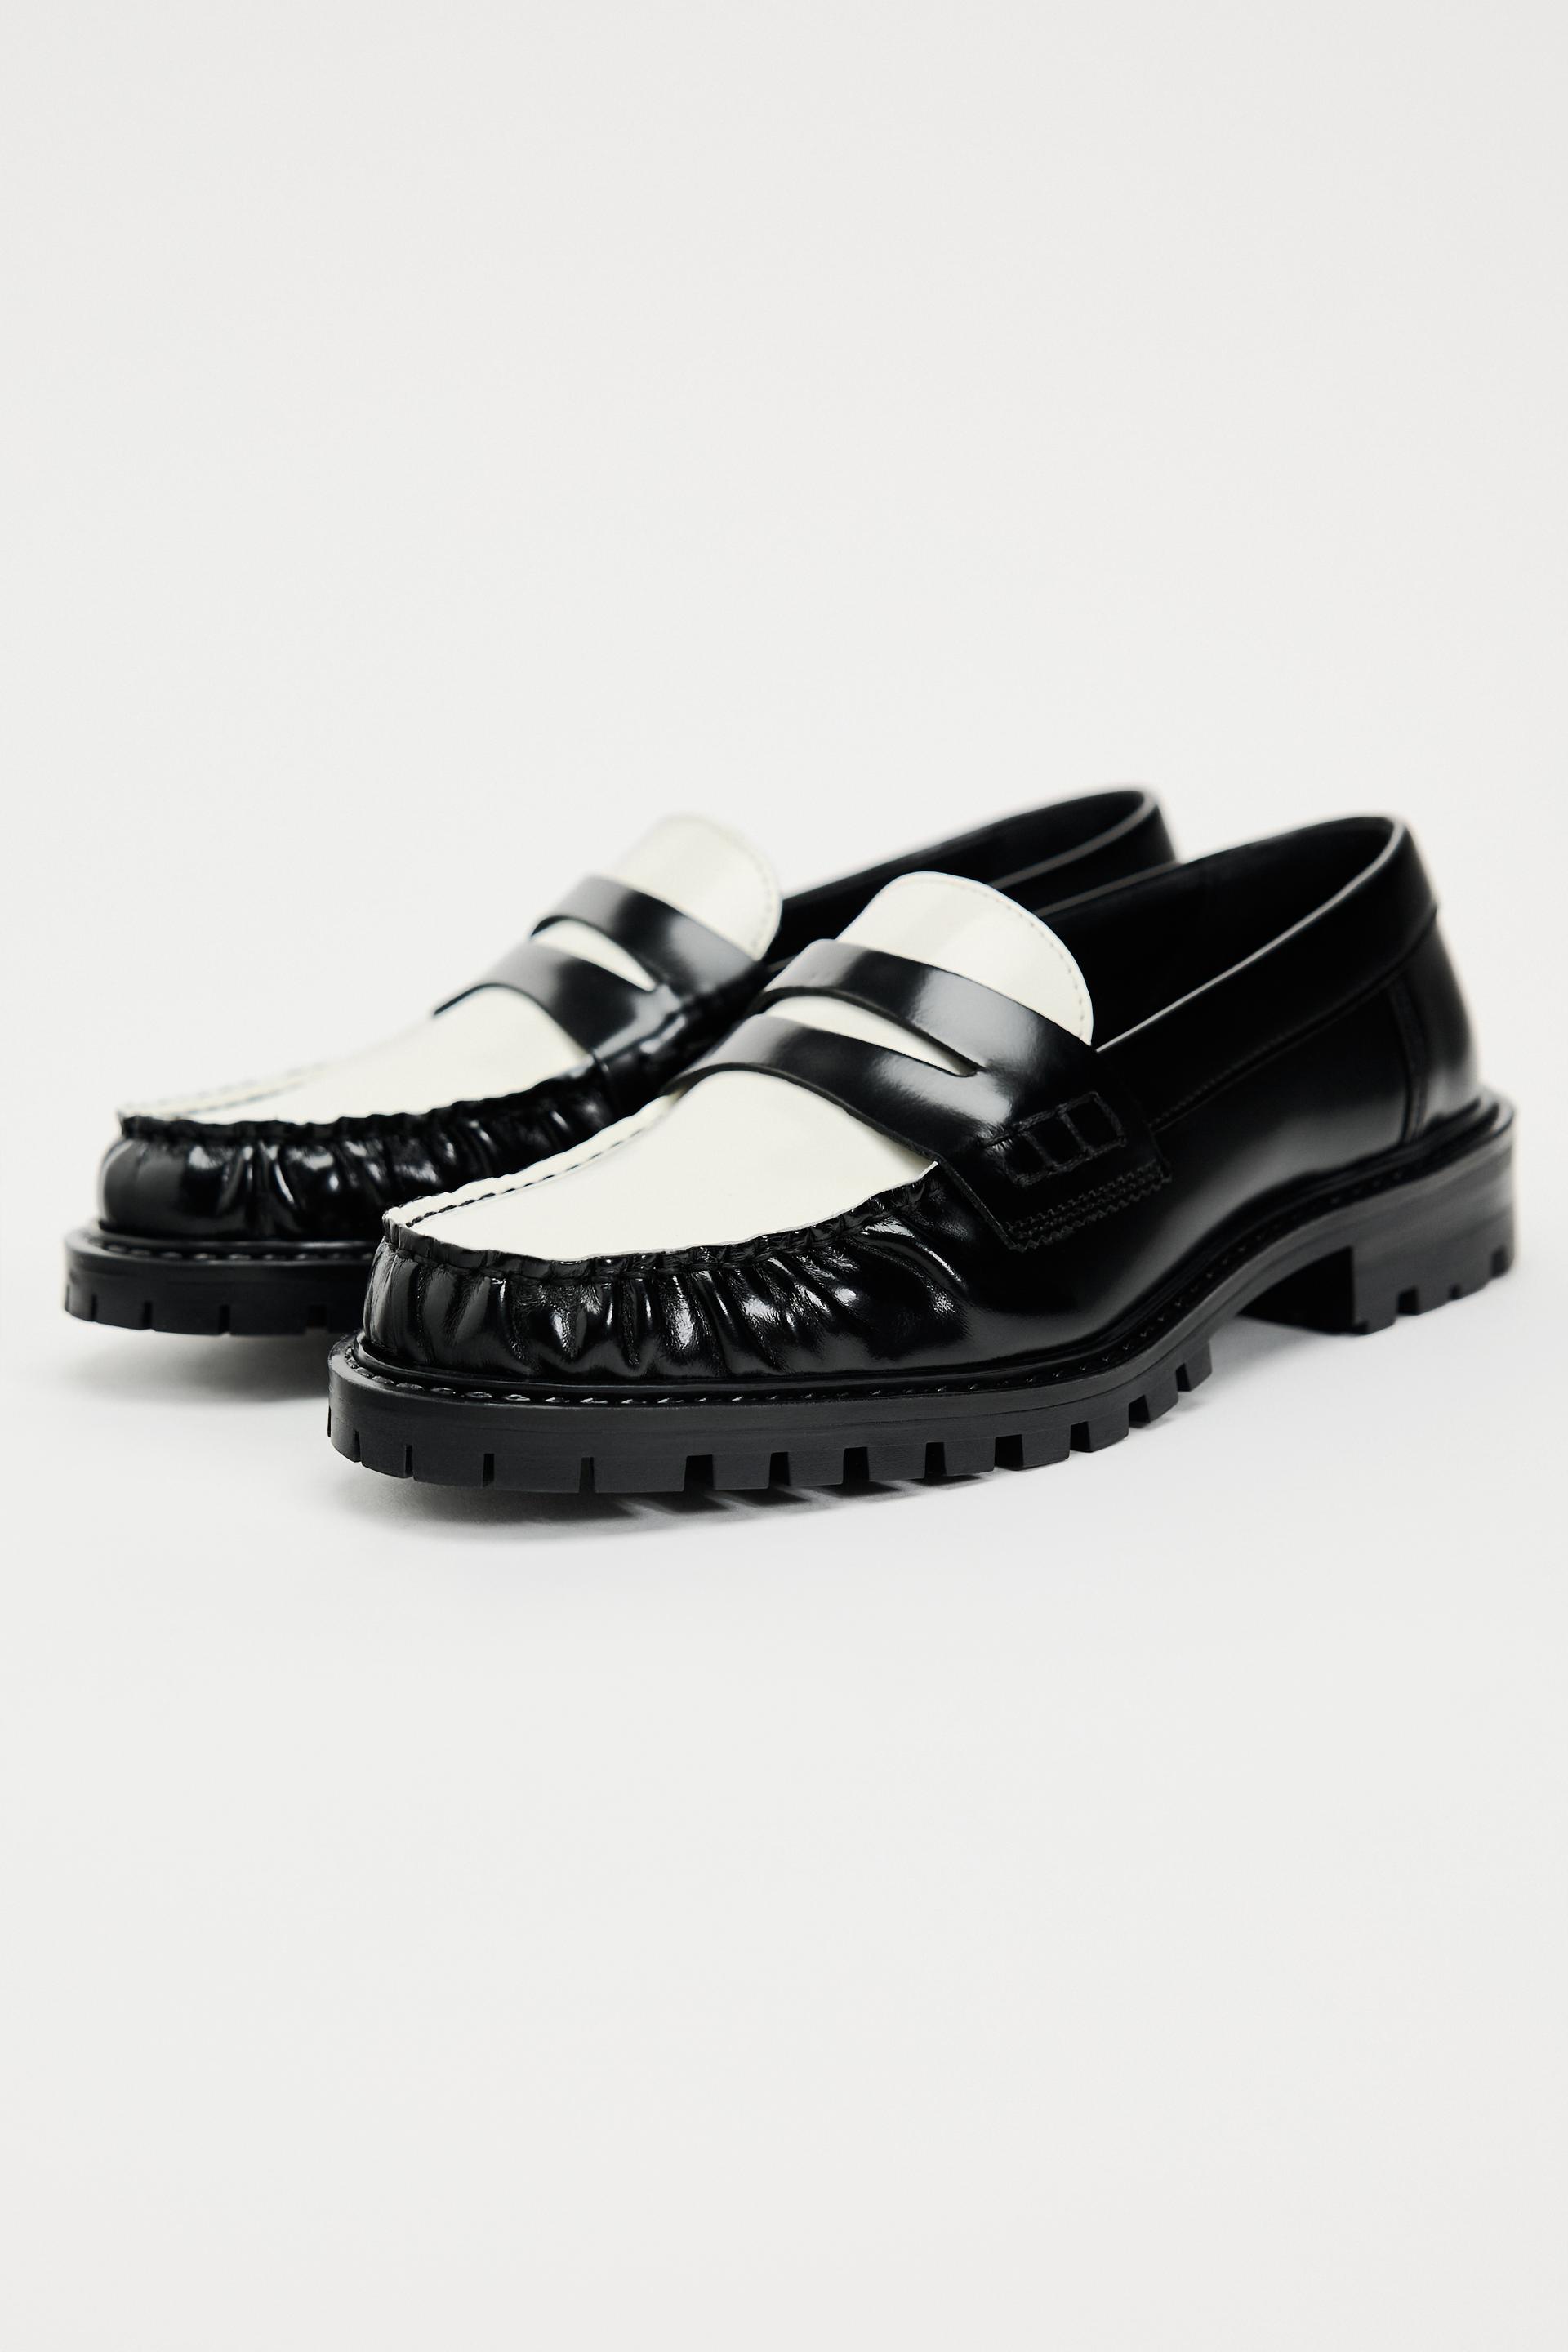 black and white leather penny loafers for women with lug soles